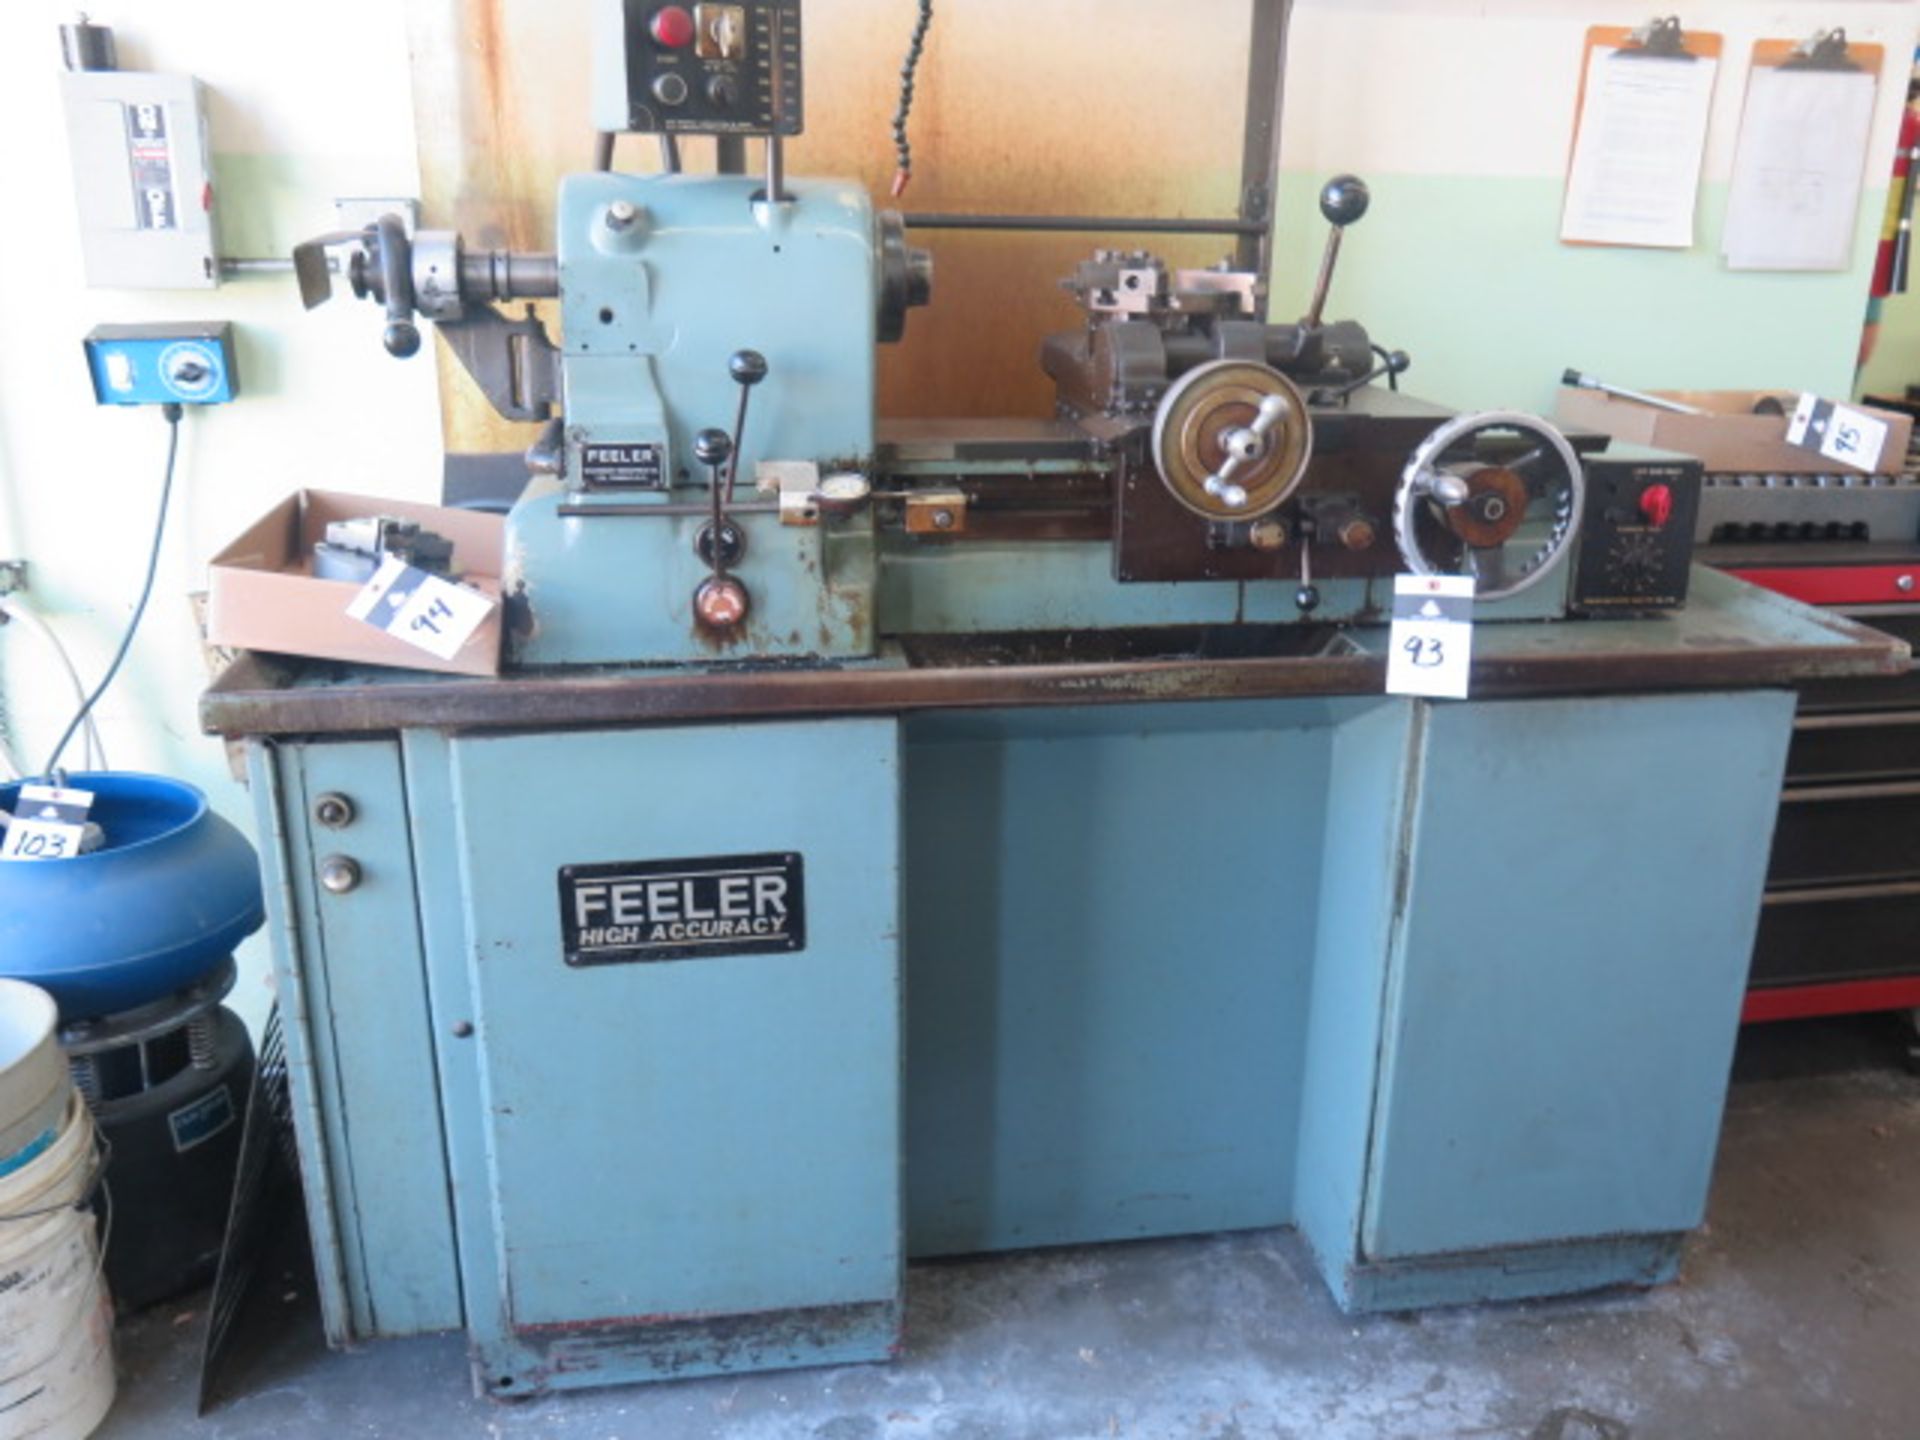 Feeler FHR-68 Hand Chucker s/n 72062 w/ 135-2955 RPM, 8-Station Turret, 5C Spindle, Power Feeds,